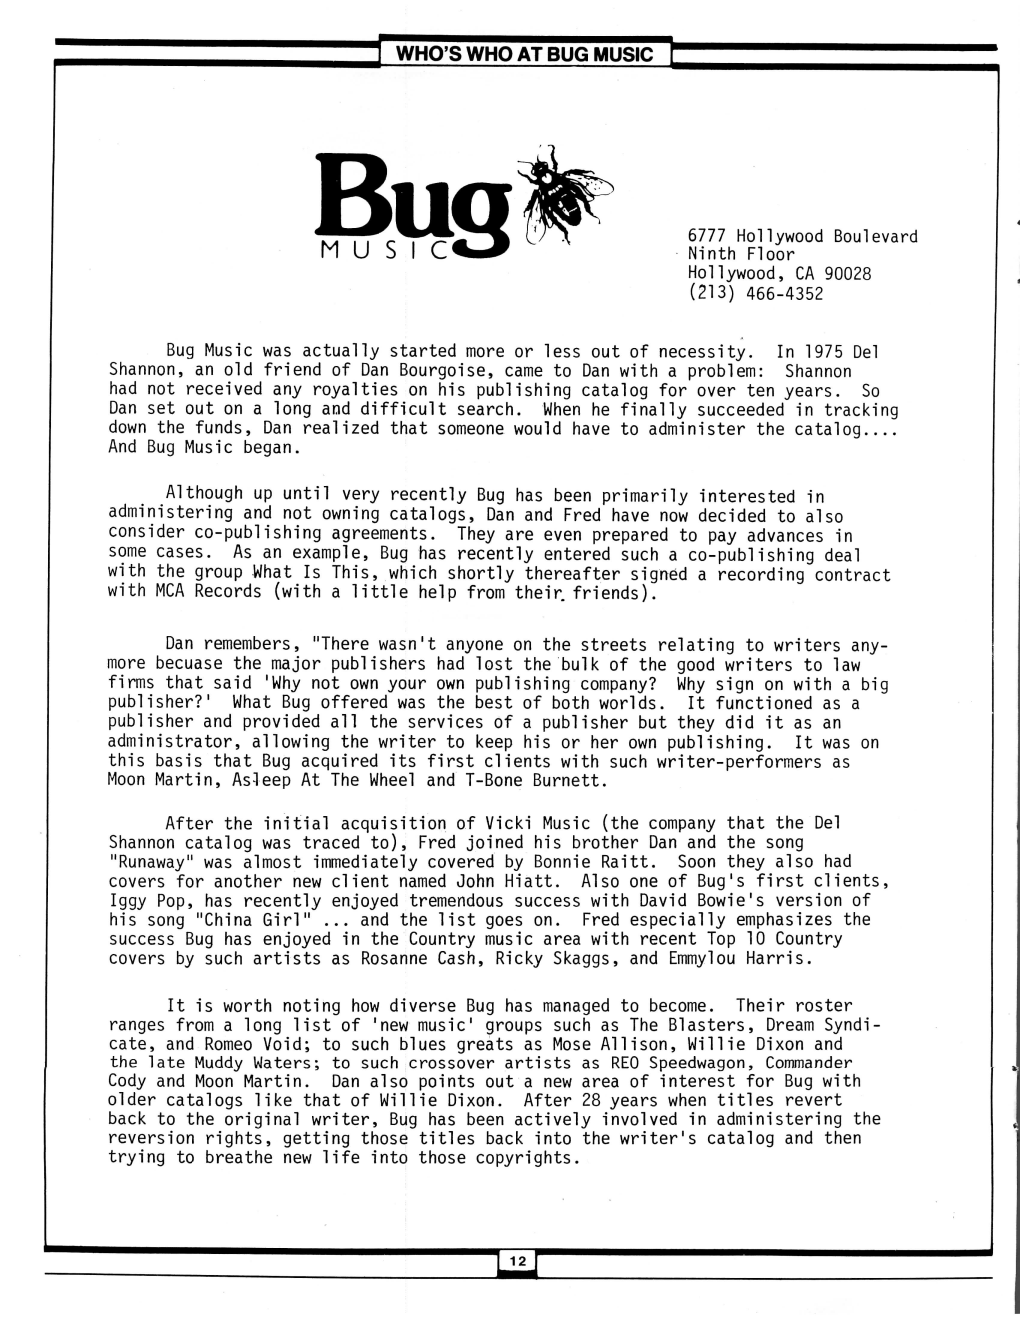 Bug Music Was Actually Started More Or Less out of Necessity